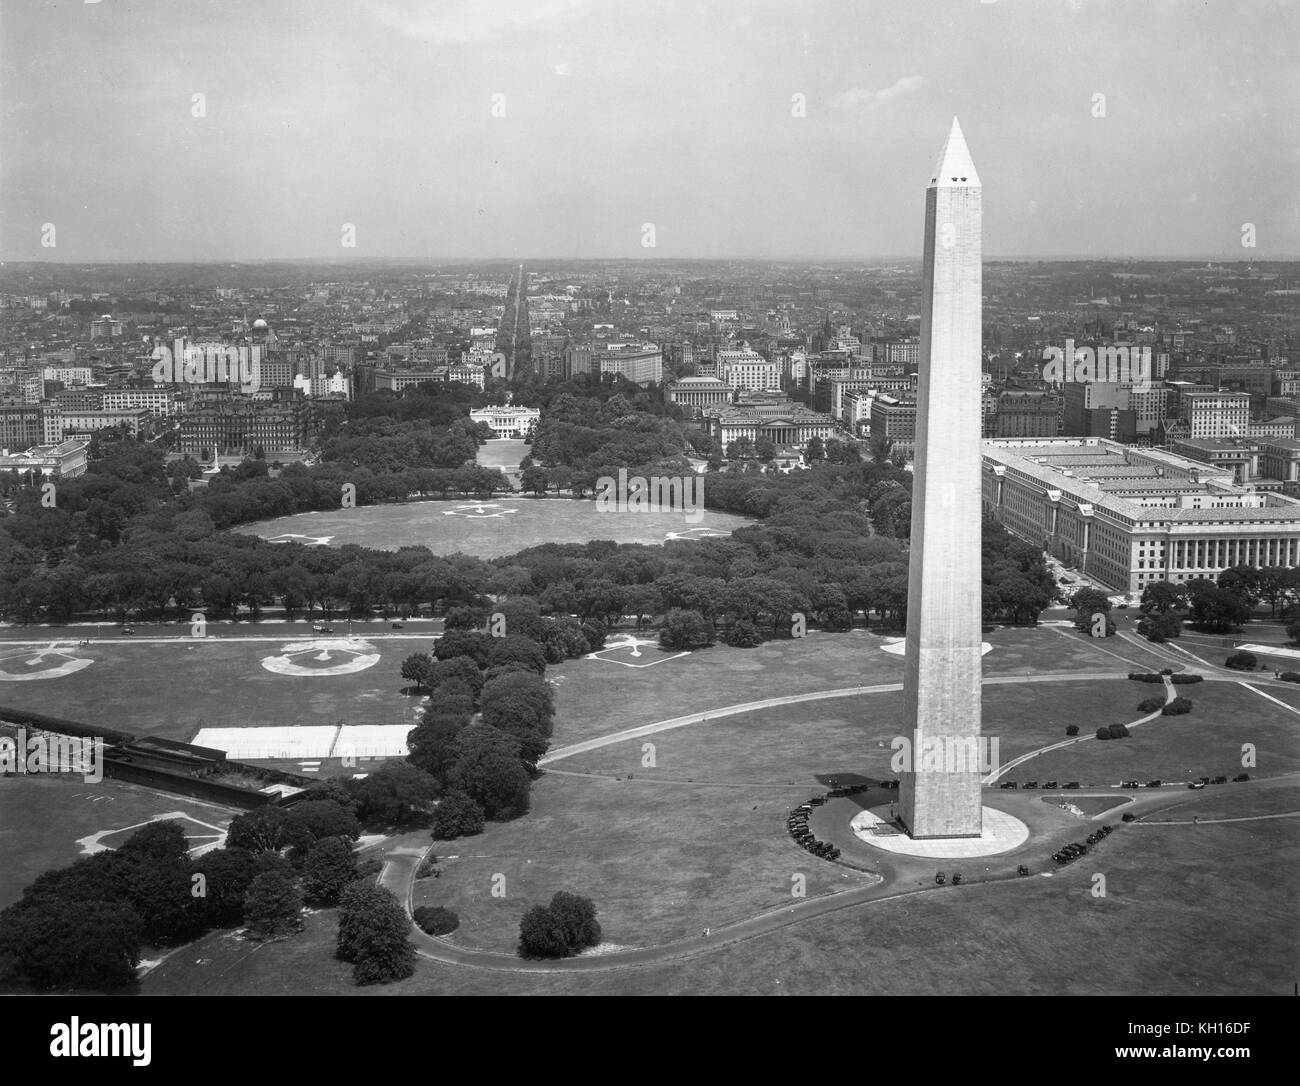 Aerial view of the Washington Monument, the Commerce Department (center) and the Tidal Basin (upper right background) before construction of the Jefferson Memorial, as taken from a US Army Air Corps aircraft, Washington, DC, 03/12/1932. Stock Photo